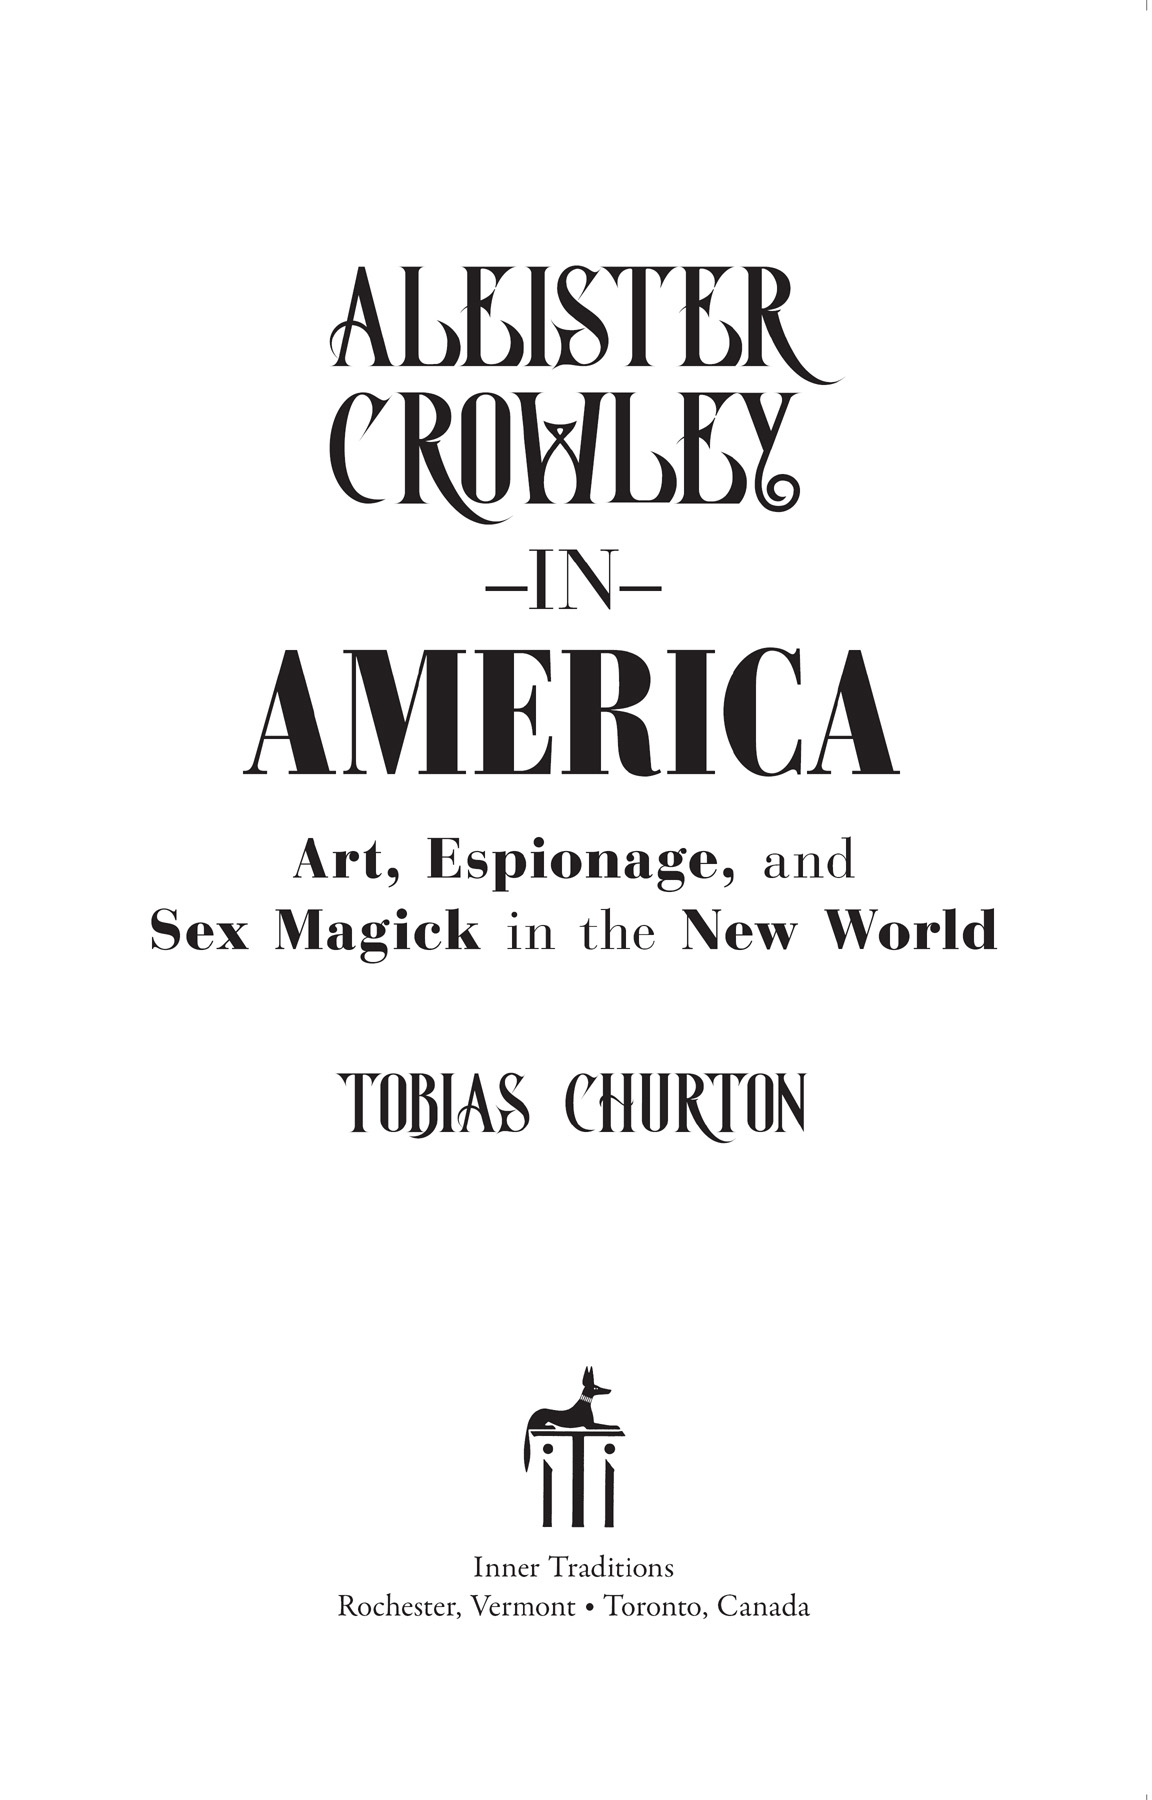 Aleister Crowley in America Art Espionage and Sex Magick in the New World - image 2